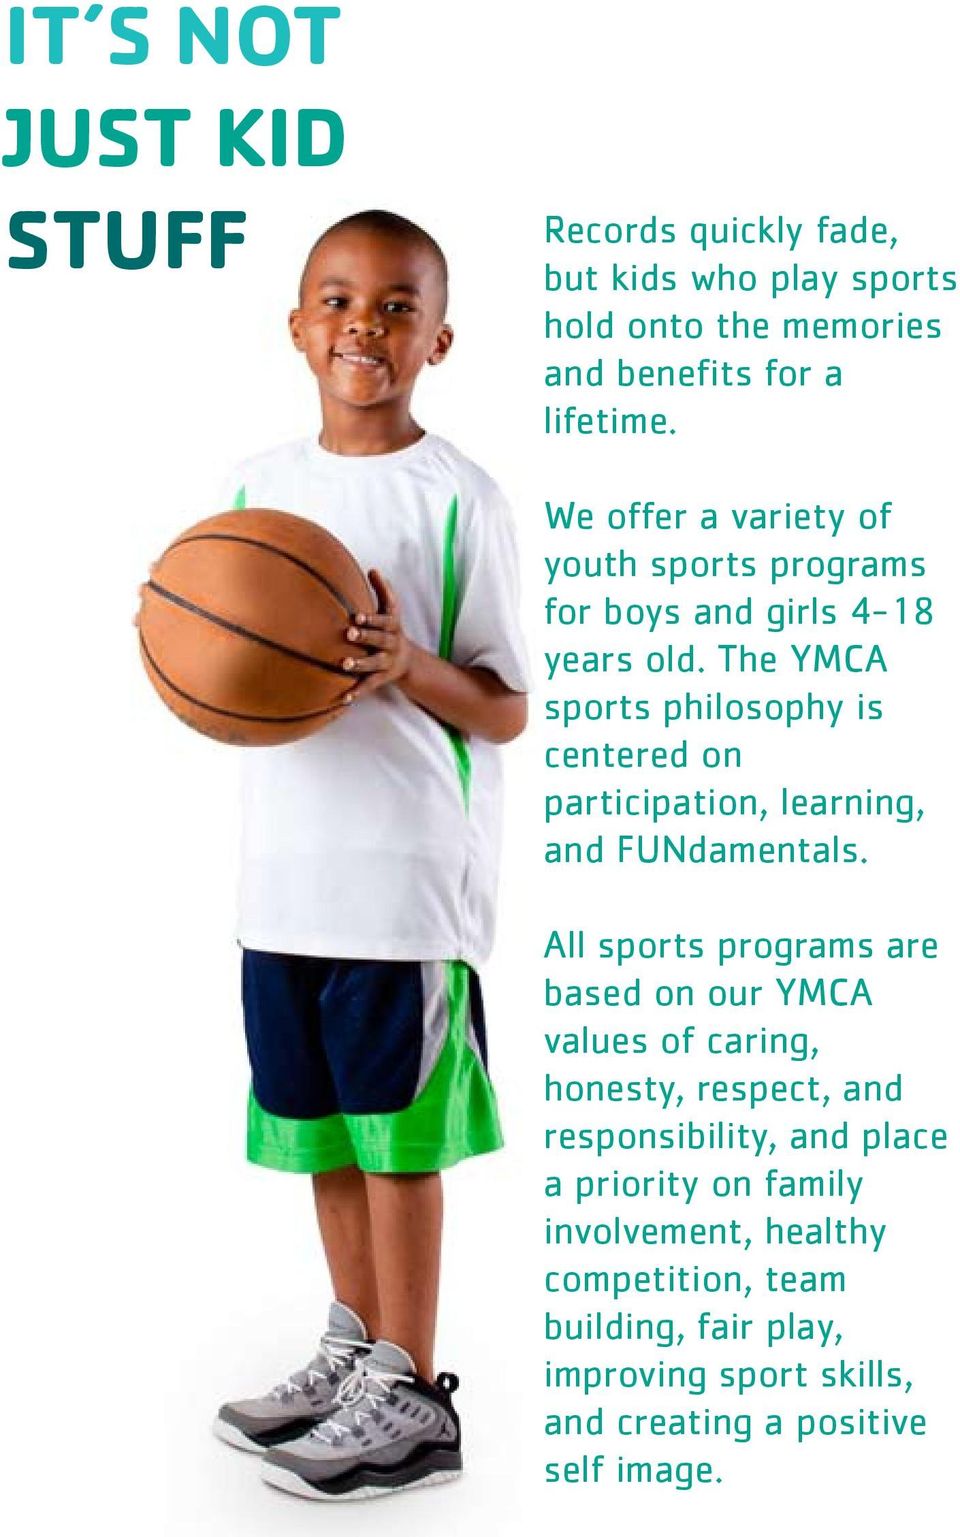 The YMCA sports philosophy is centered on participation, learning, and FUNdamentals.